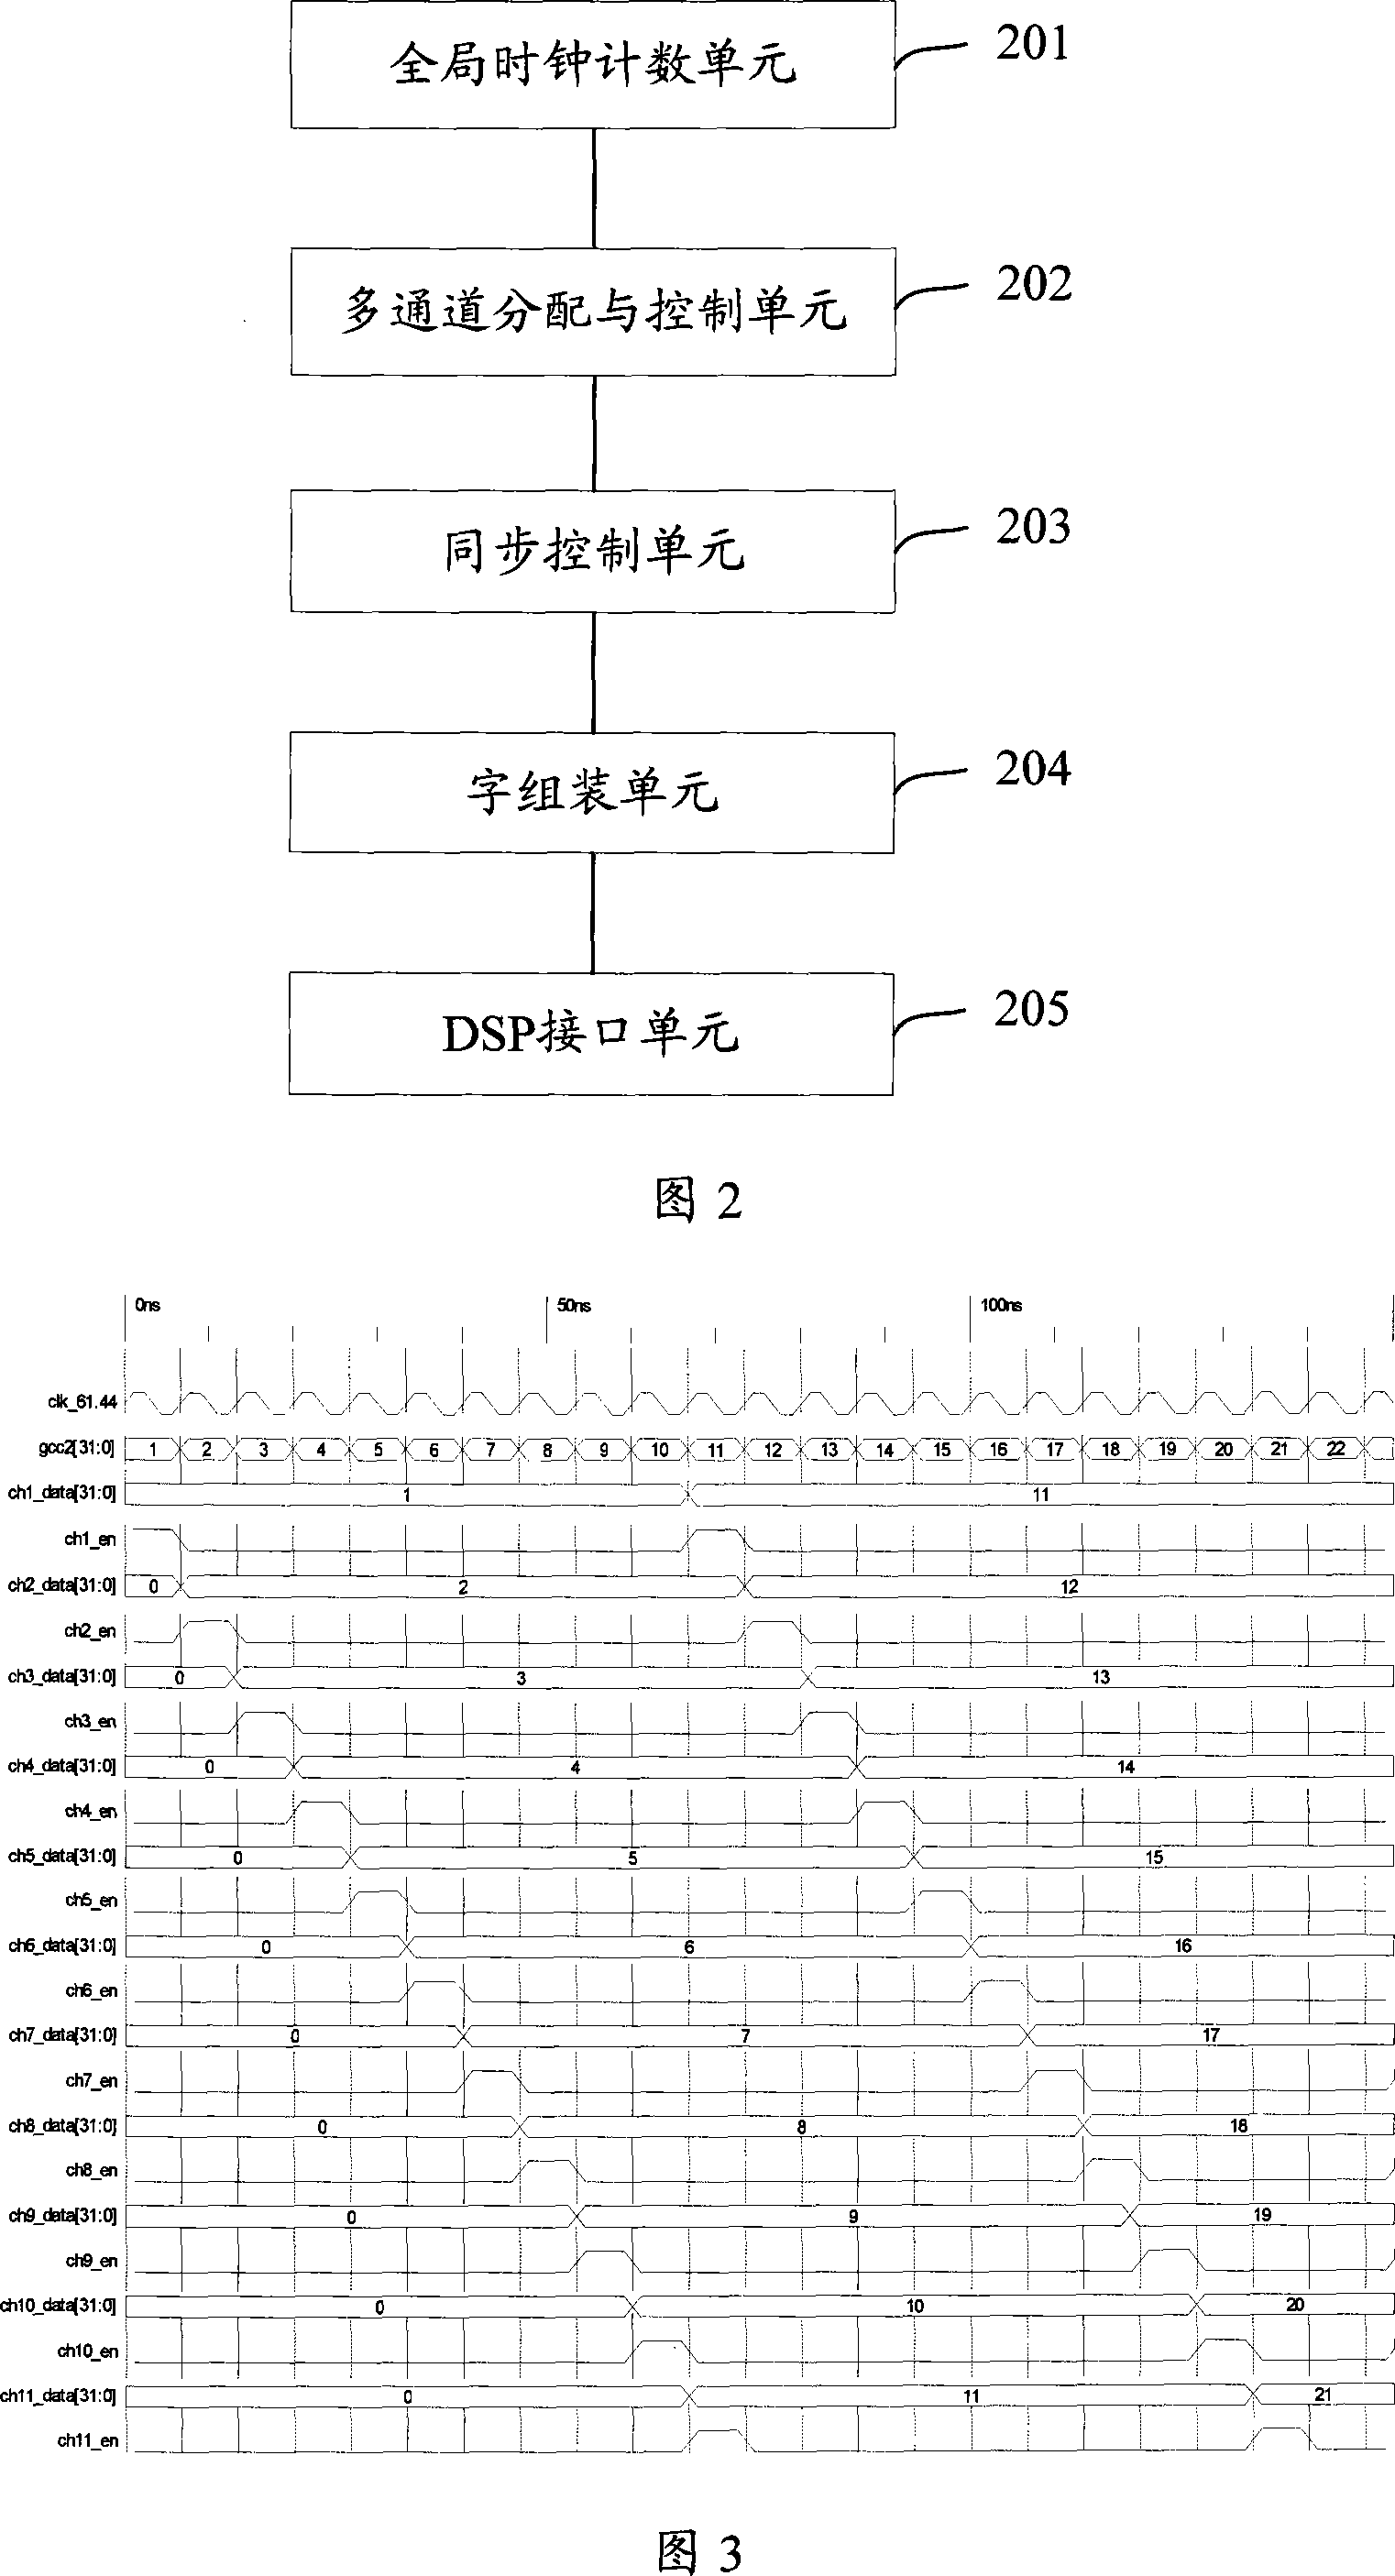 Asynchronous clock data transmission device and method